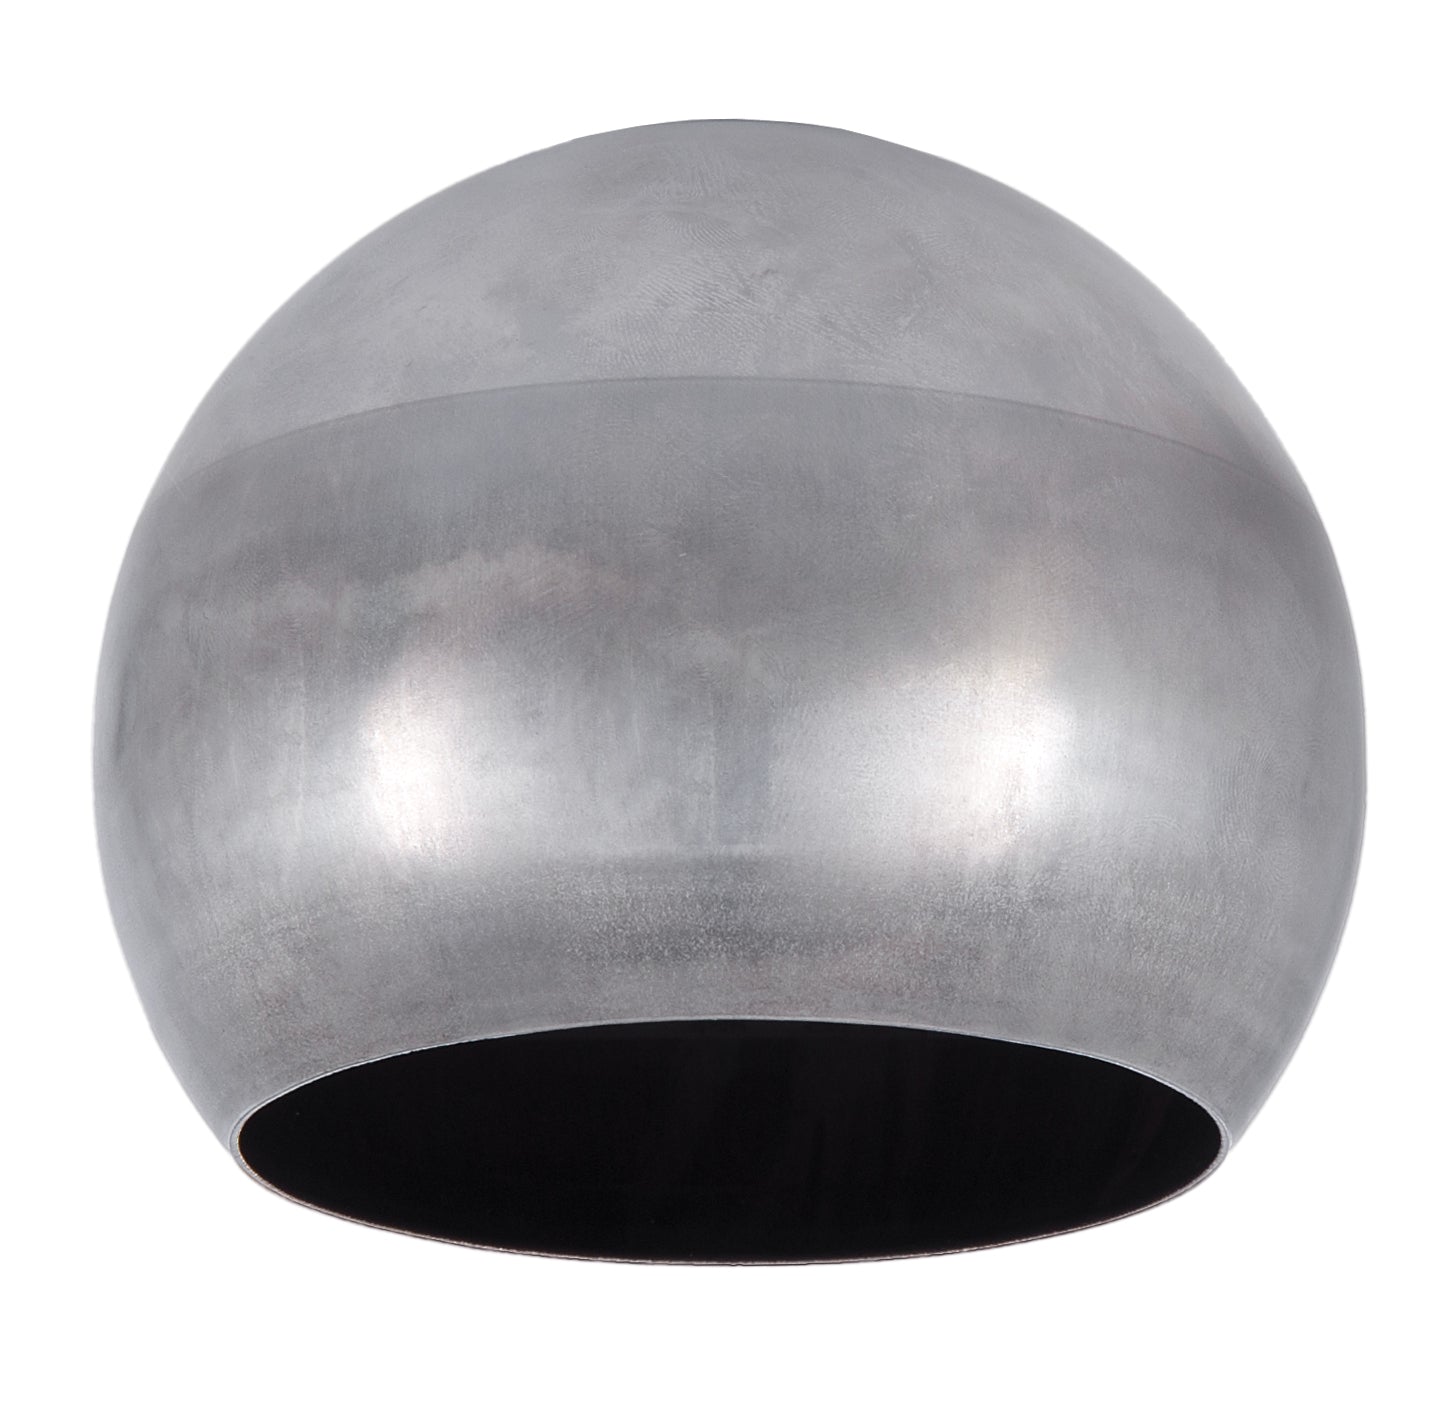 Eyeball Shaped, Steel Metal Lamp Shades - Choose From 9 Sizes